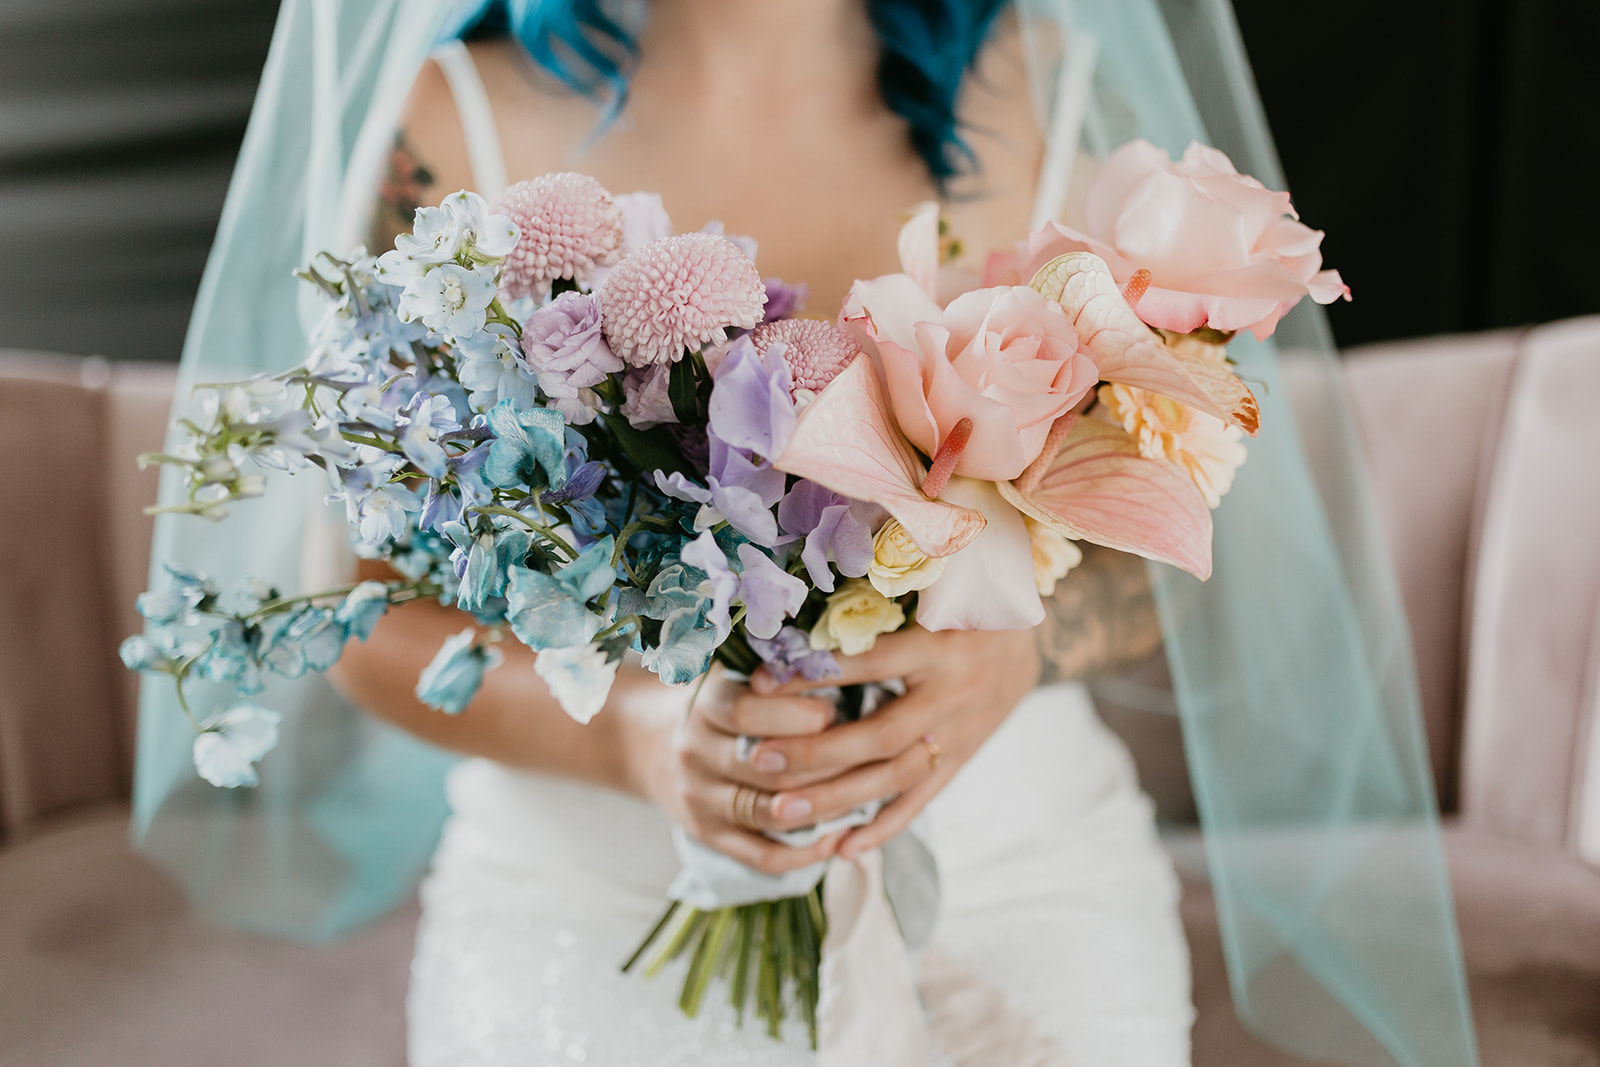 Holographic inspired wedding bouquet